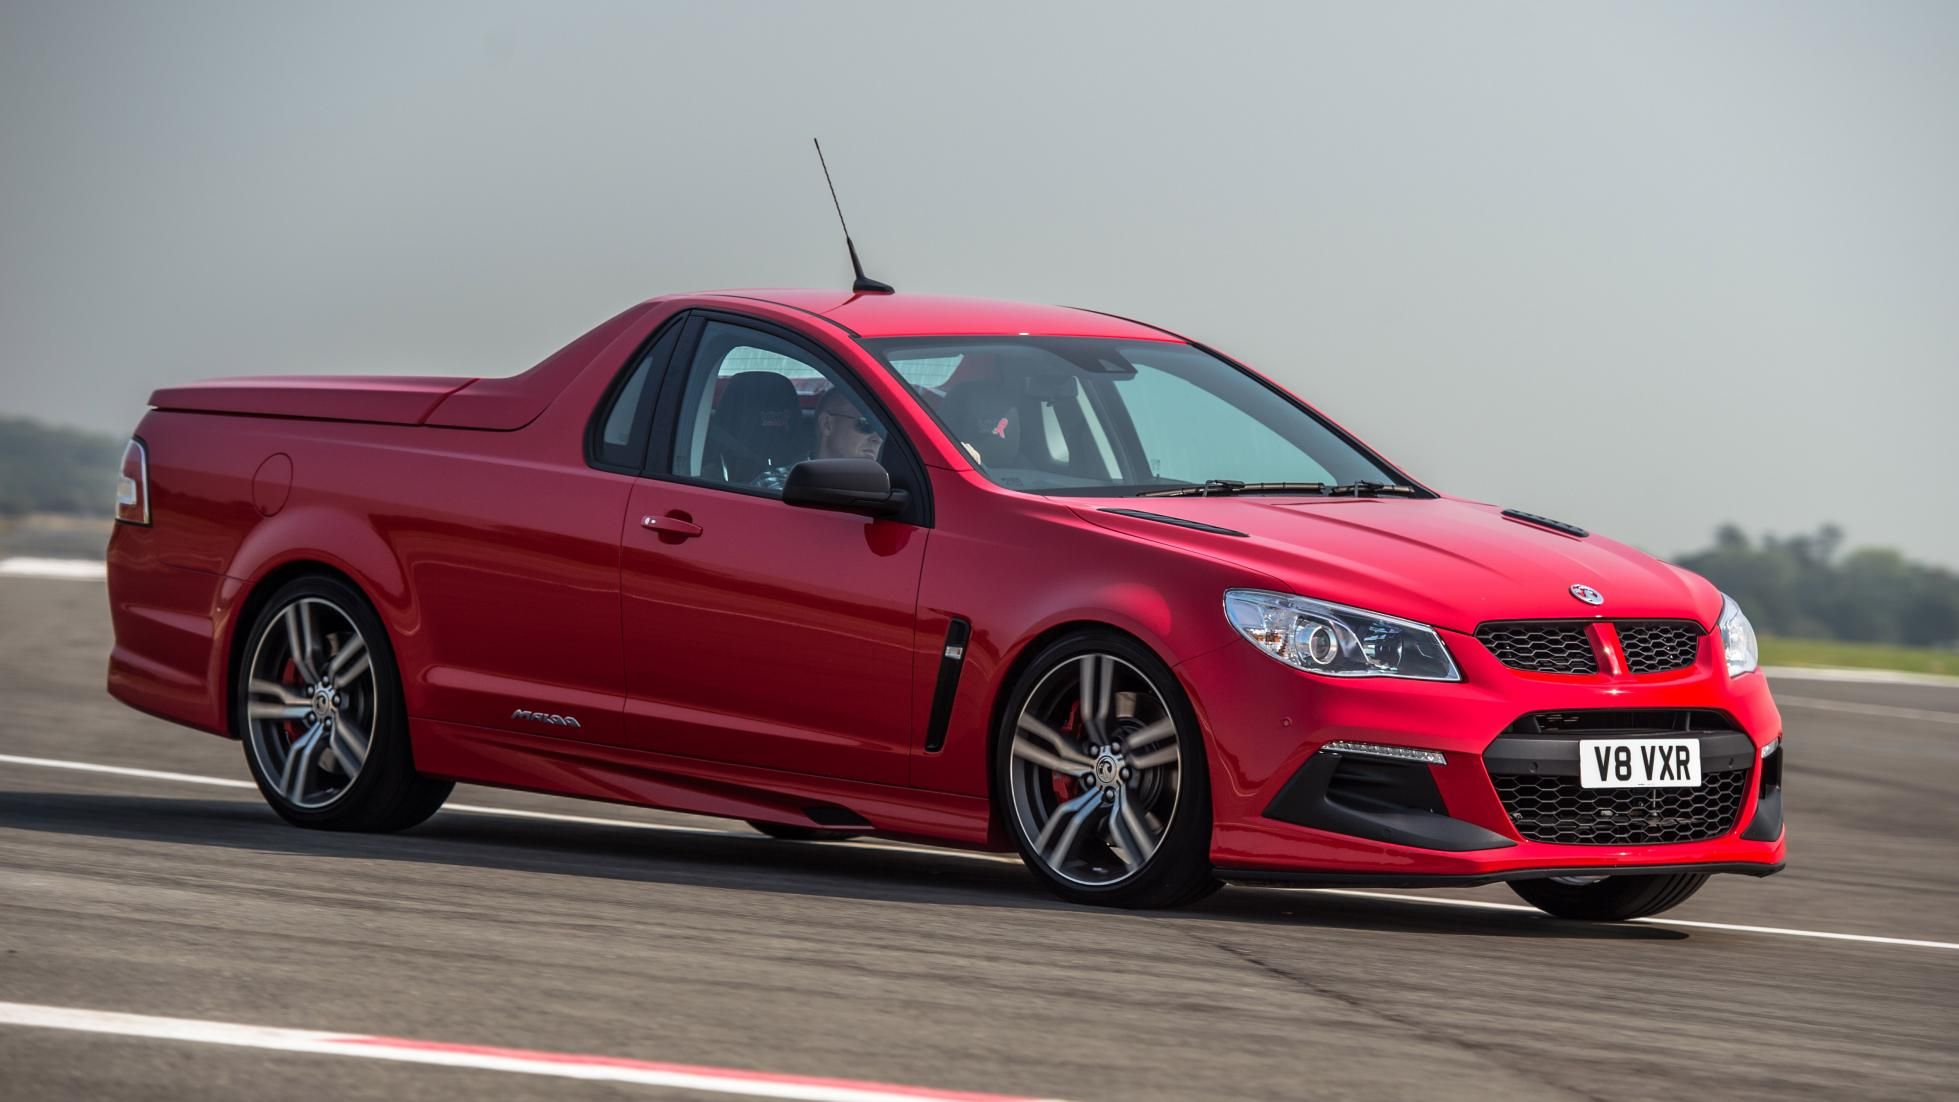 2017 Vauxhall VXR8 Maloo Circuit Test Front And Side View (View 24 of 26)